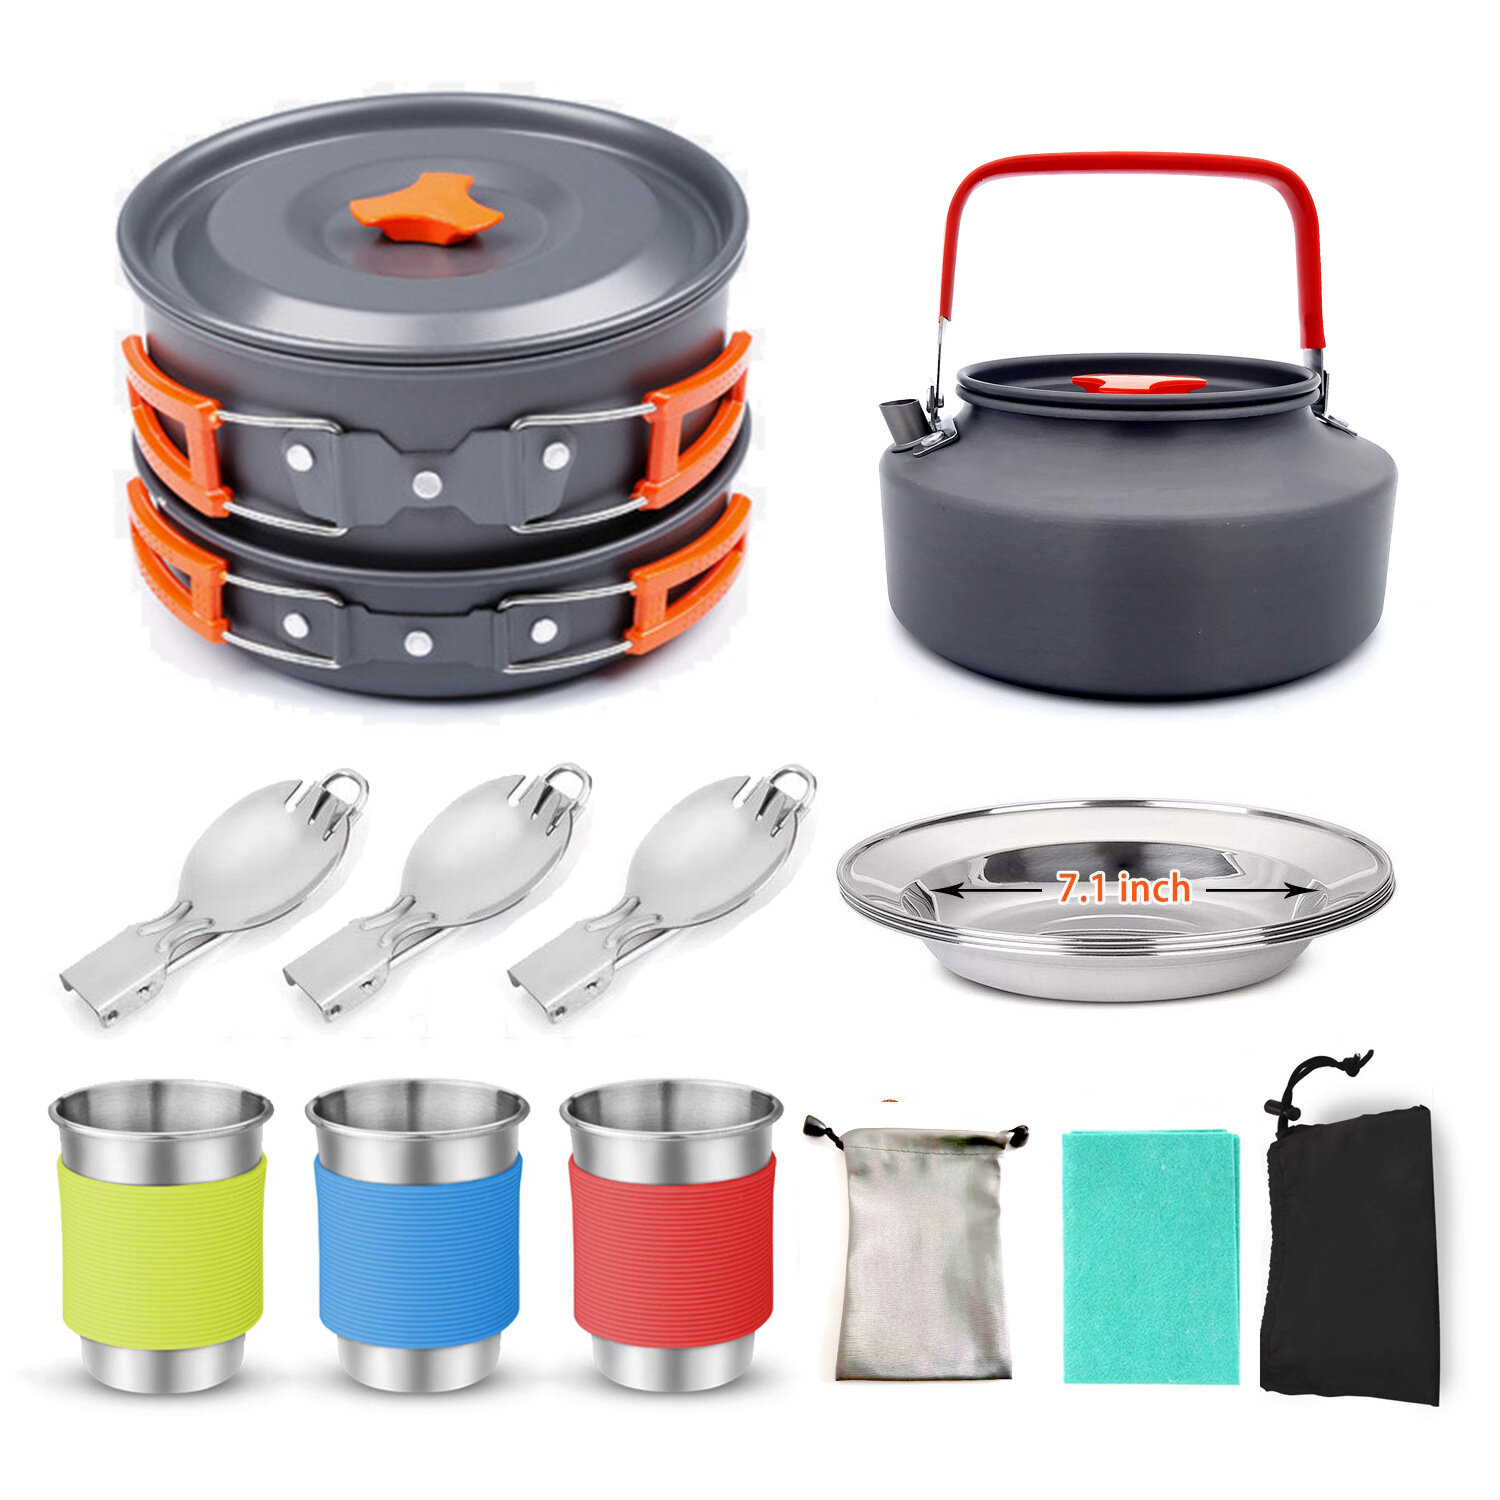 Barbhorse Outdoor Picnic Tableware Camping Pot Trekking Stove Pieces Set Pot + Plates + Kettle + Cups + Forks Cooking Frying Tools